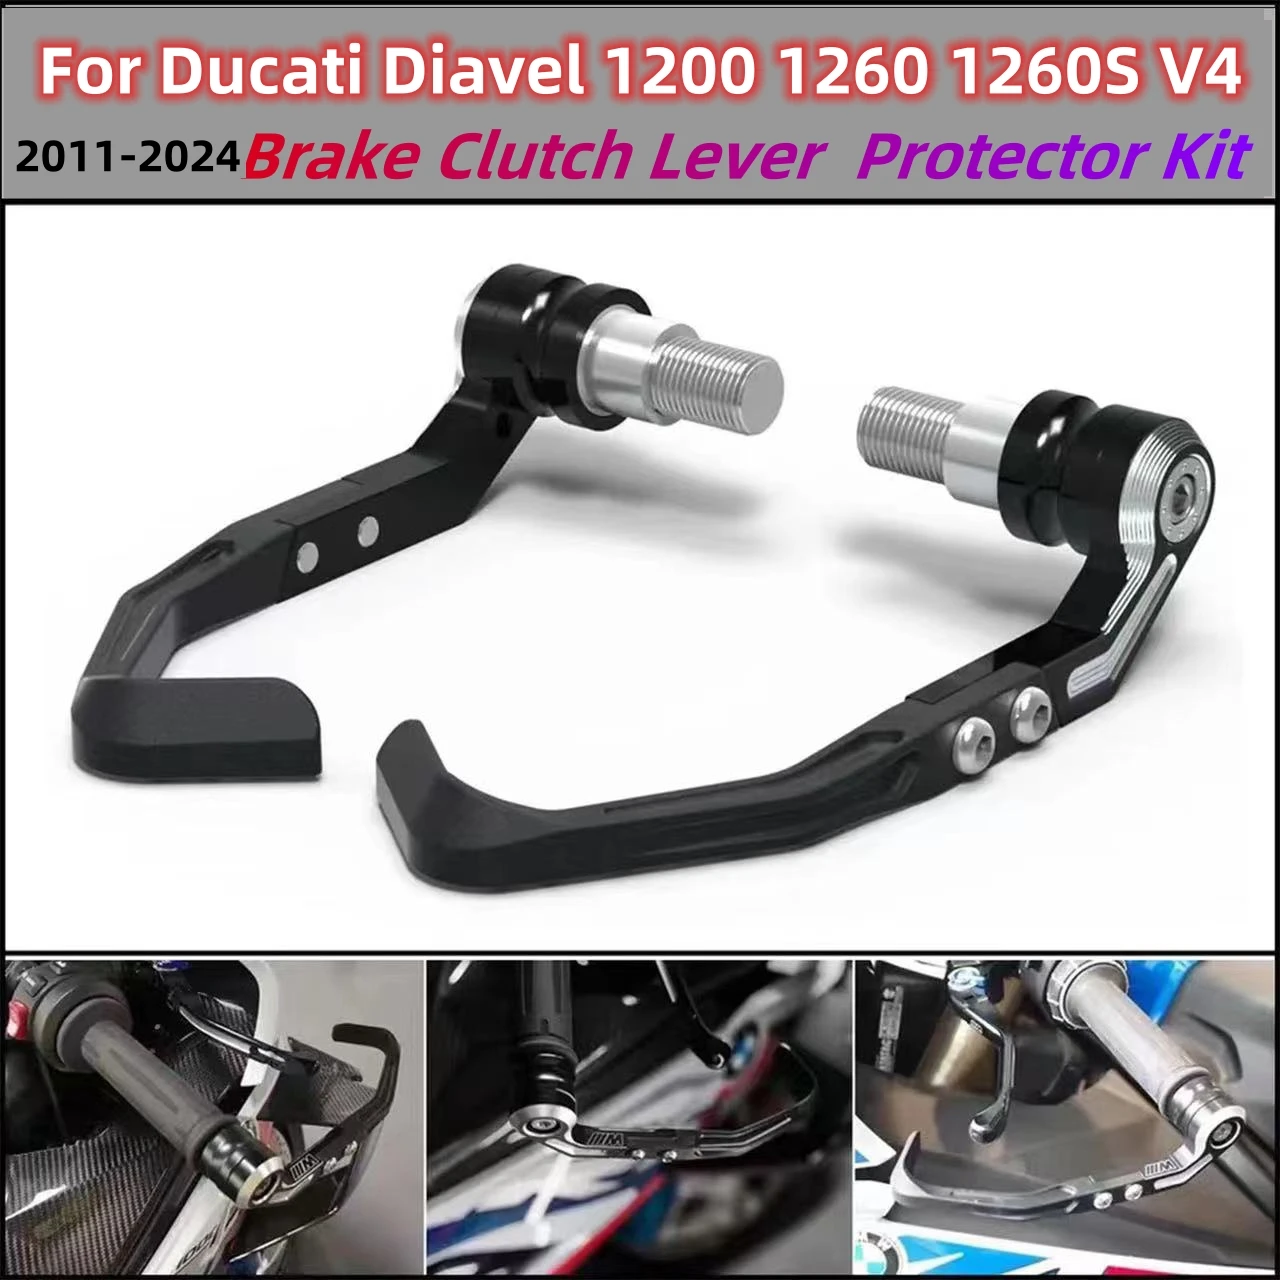 

Motorcycle Brake and Clutch Lever Protector Kit For Ducati Diavel 1200 1260 1260S V4 2011-2024